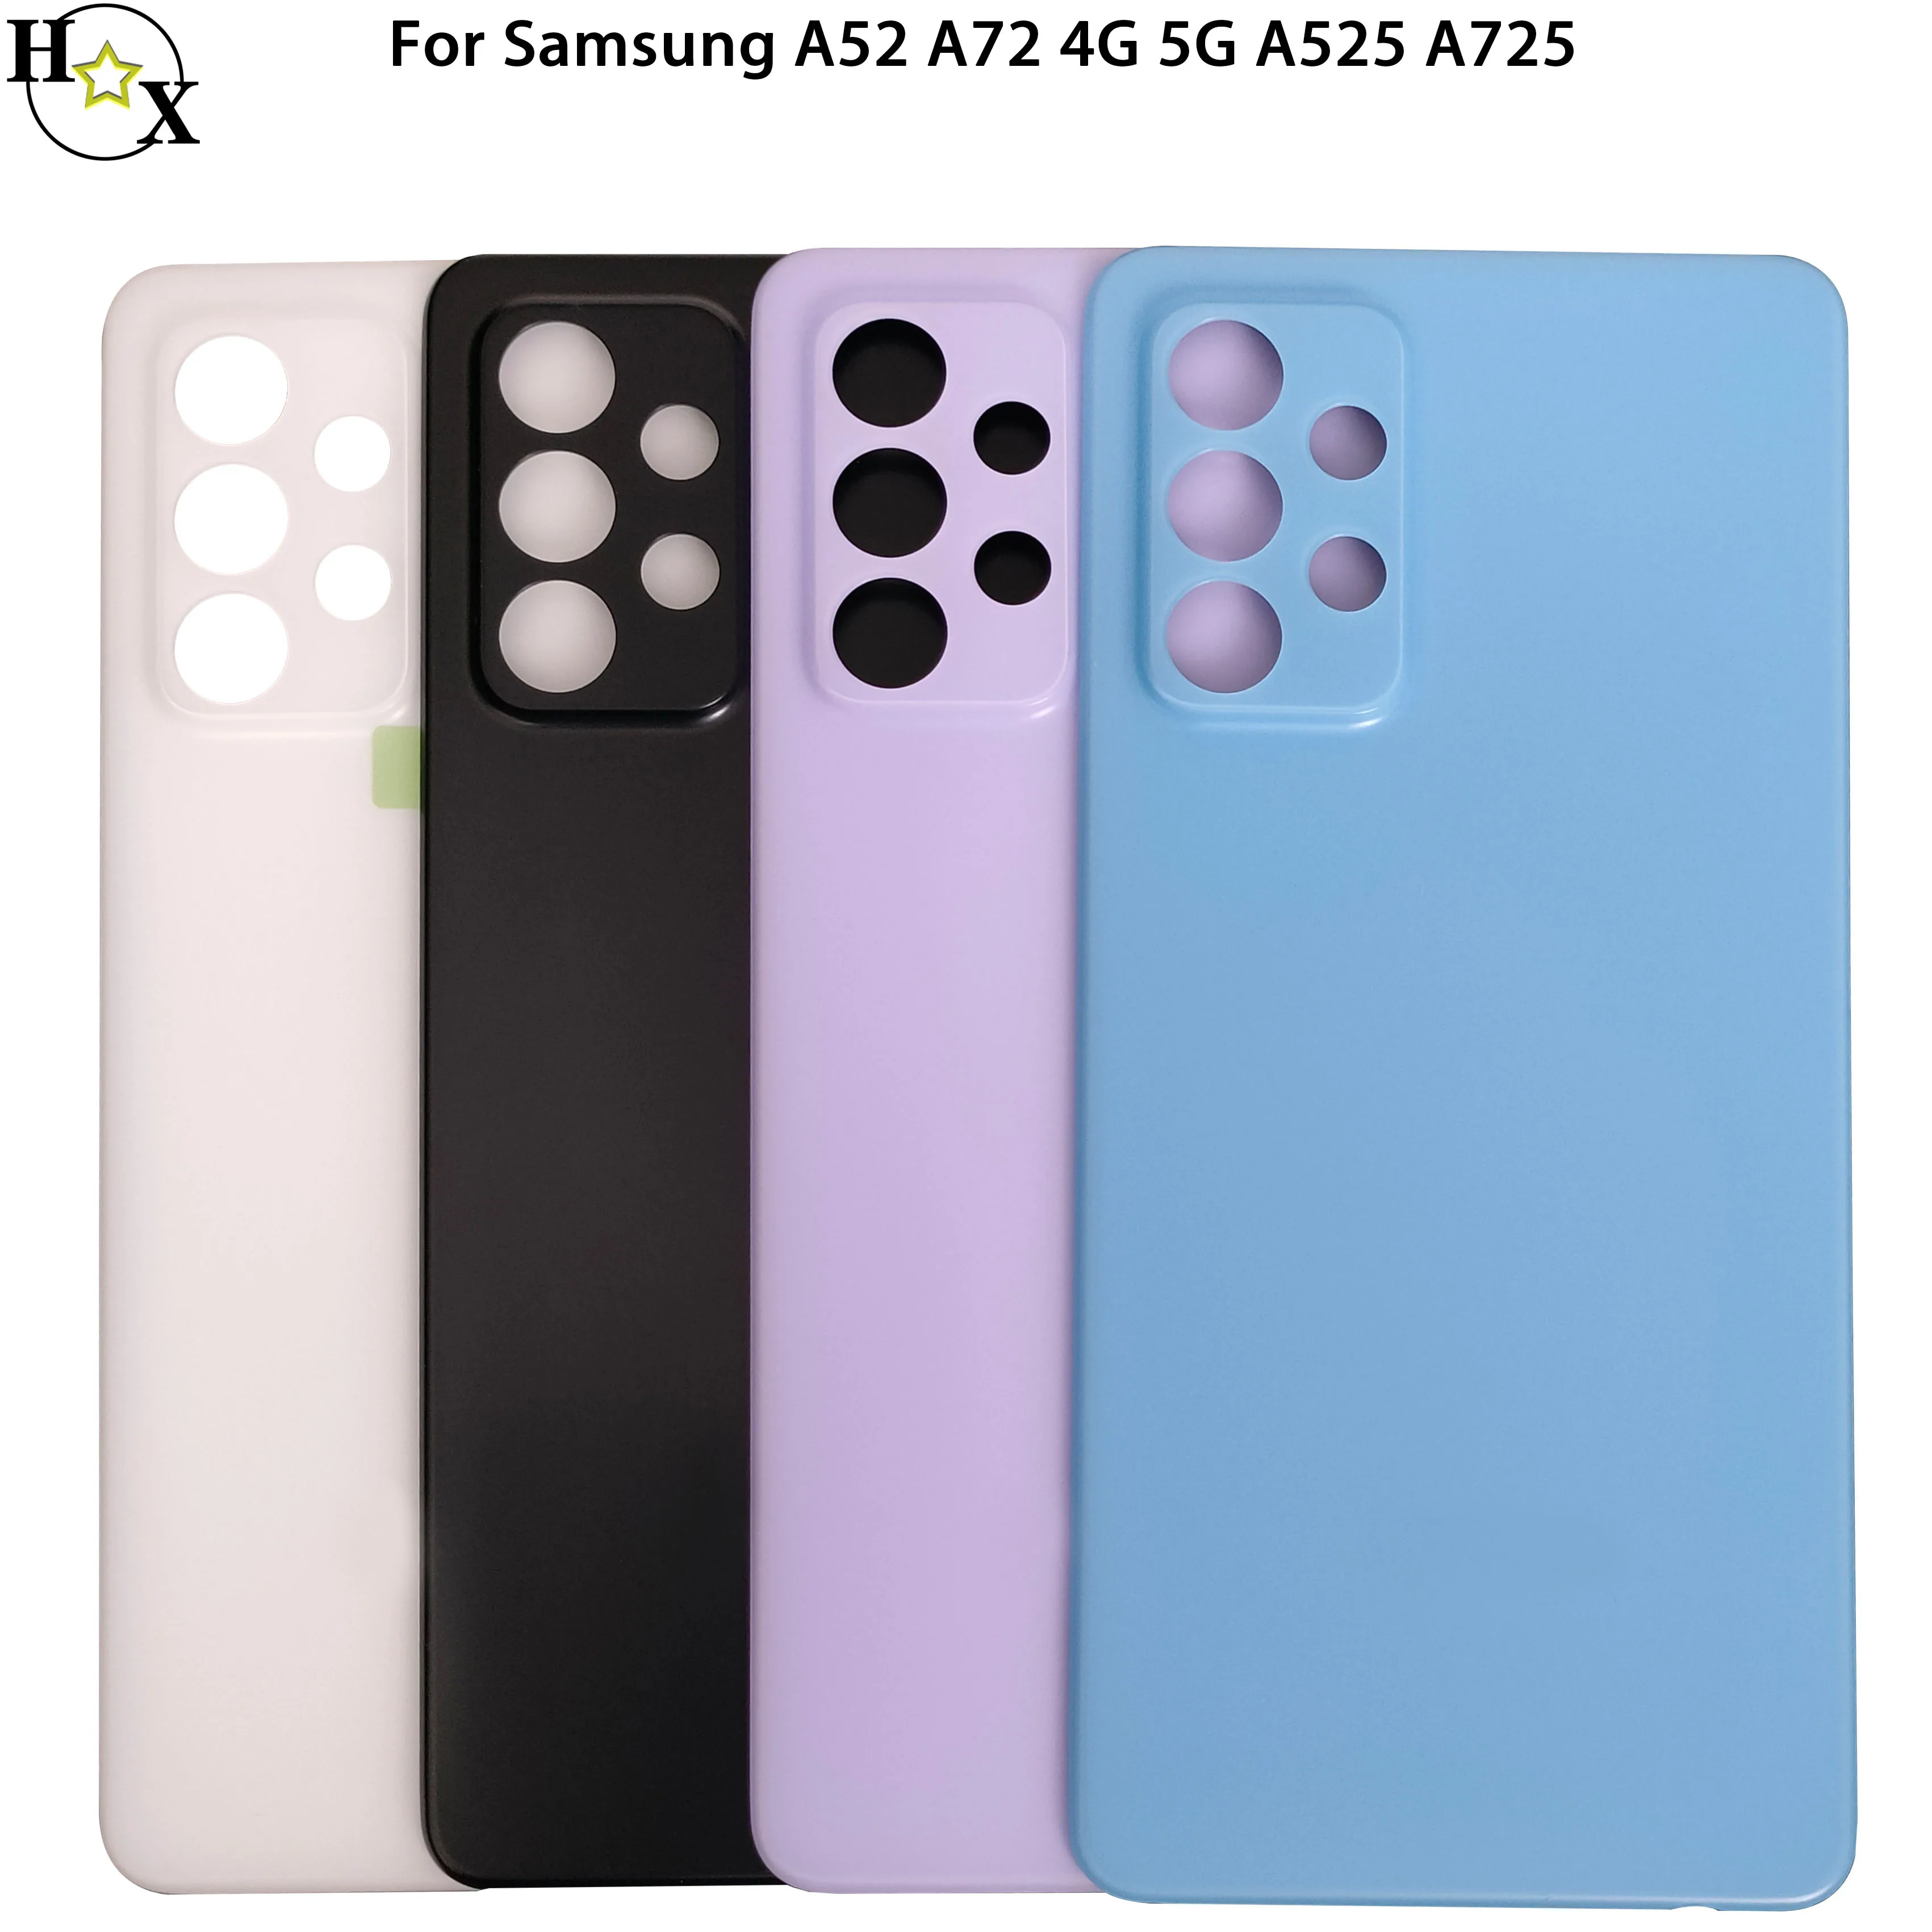 For Samsung Galaxy A52 A72 4G 5G Back Cover Housing Rear Phone Case Battery  Plastic Door Lid Adhesive Stickers Replacement